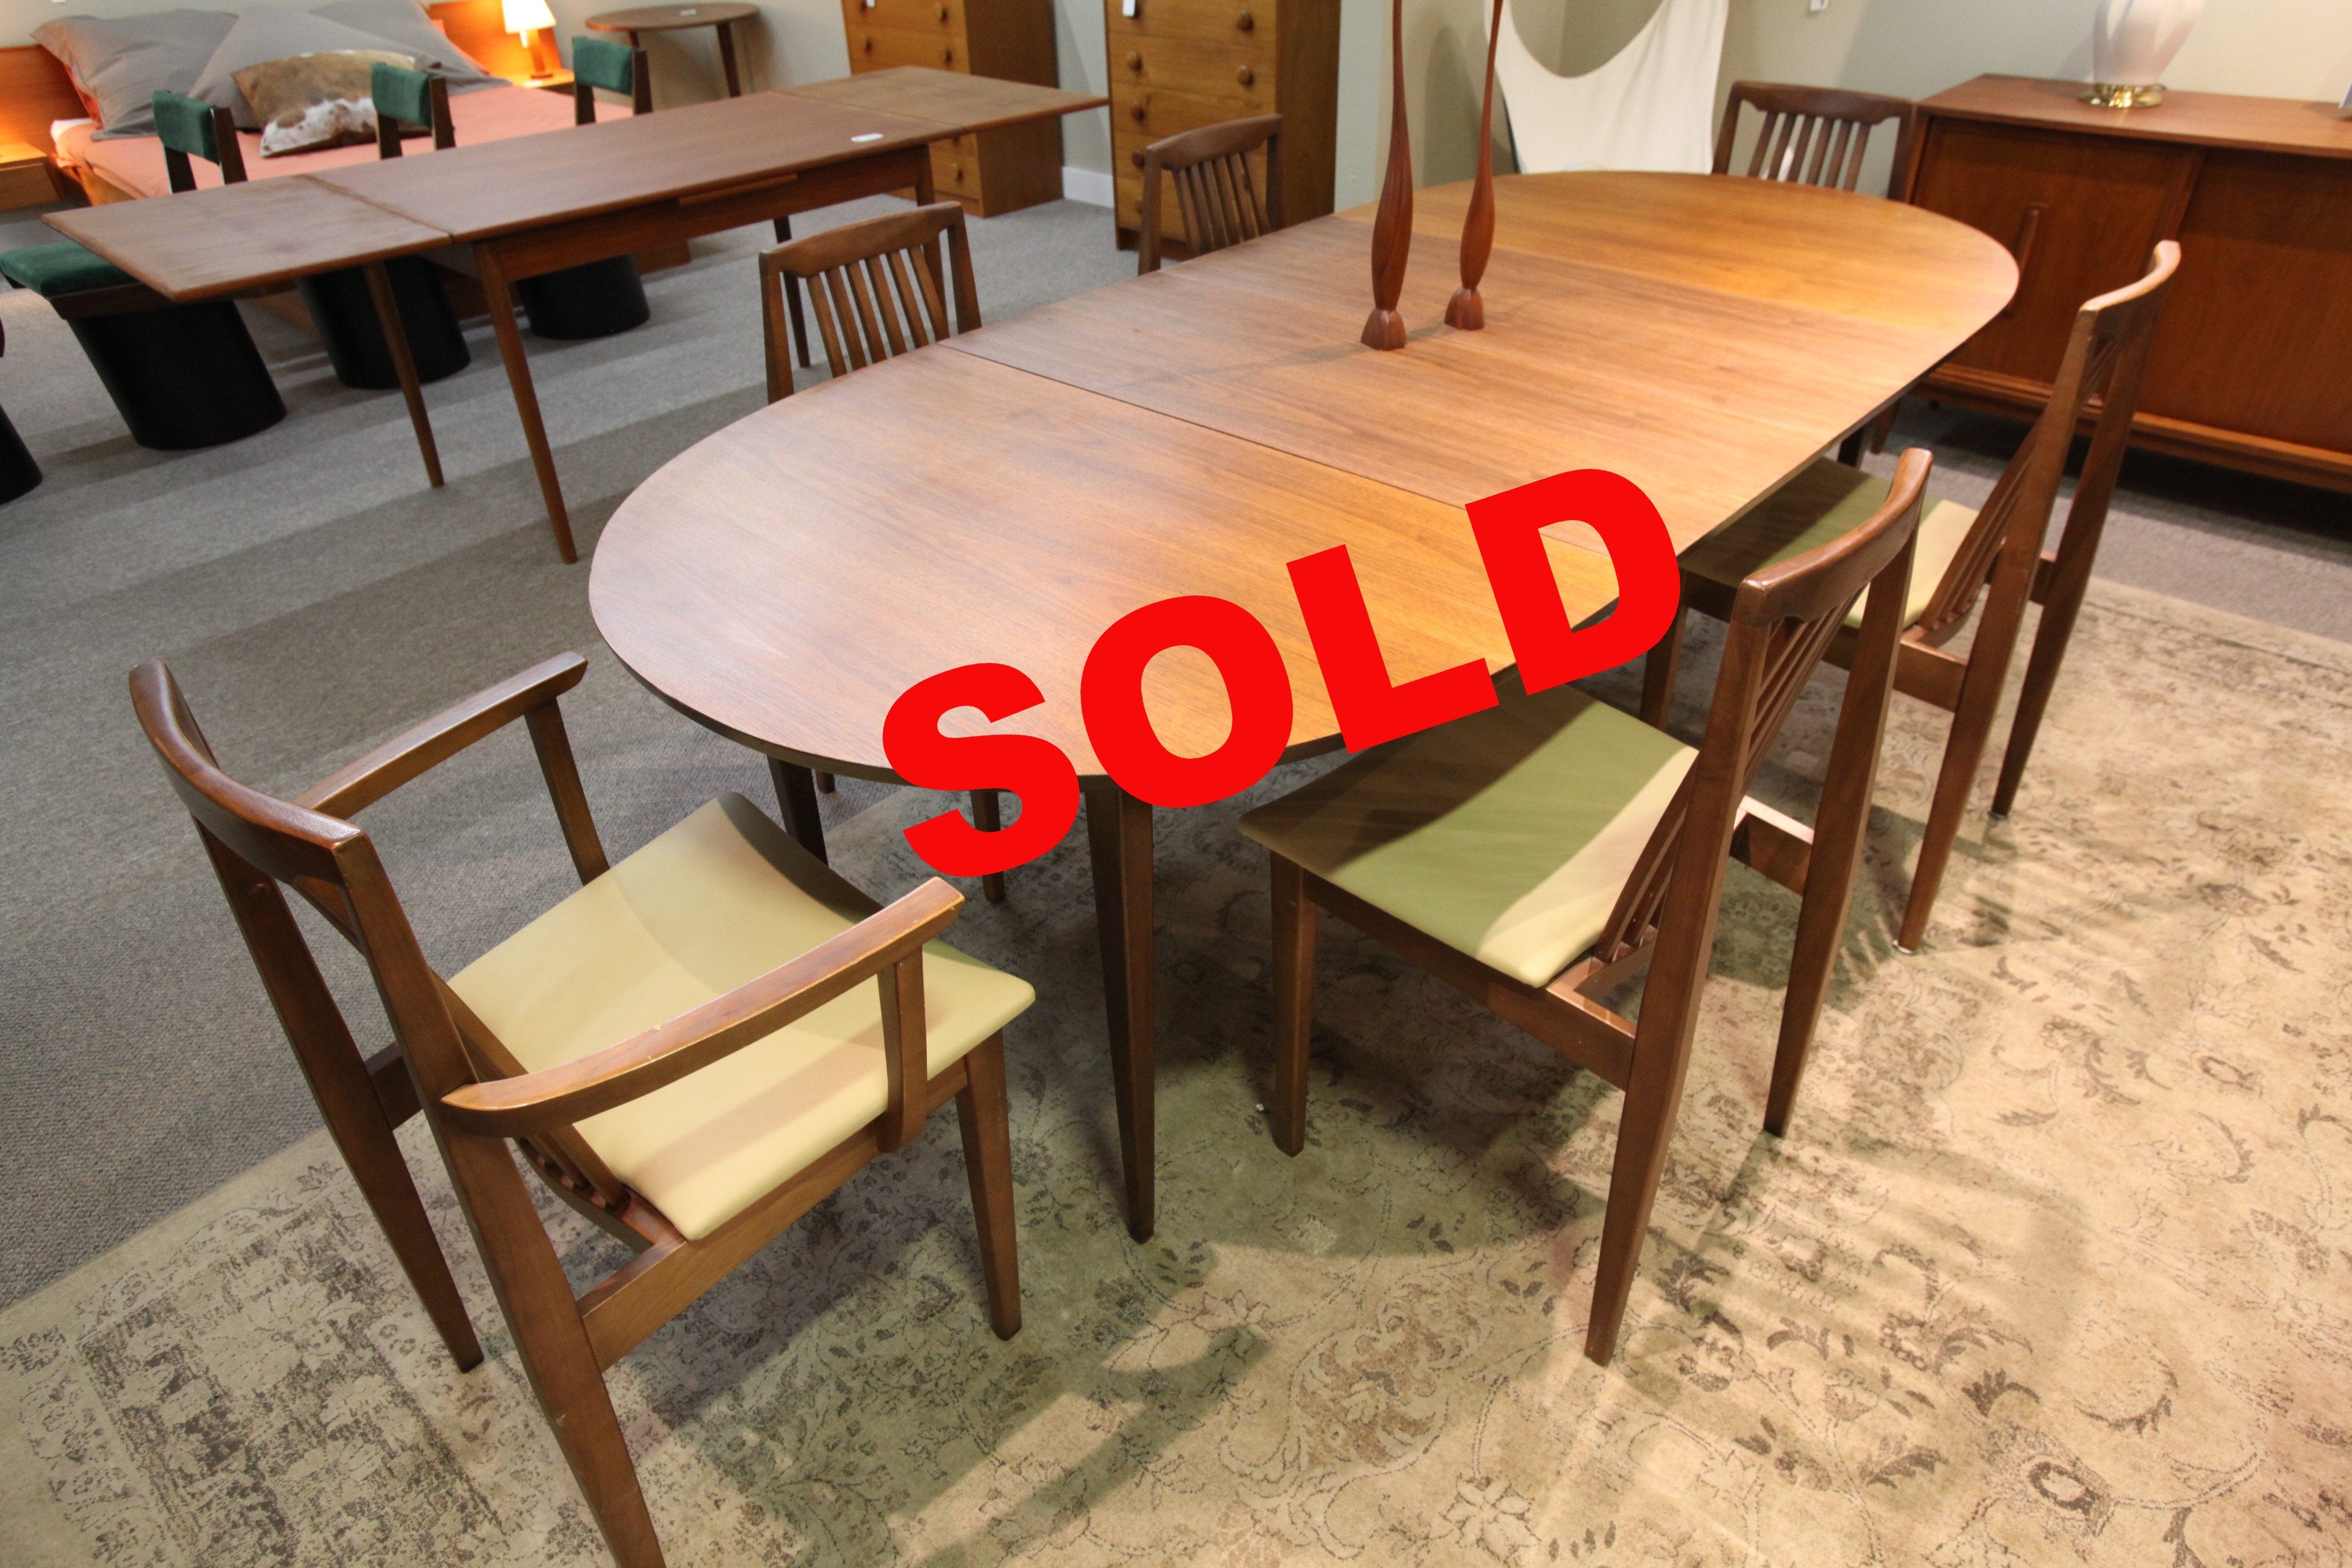 Honderich (1960) Walnut Dining Table w/2 Leafs and 6 Chairs (92"x41.5") or (57.5"x41.5")